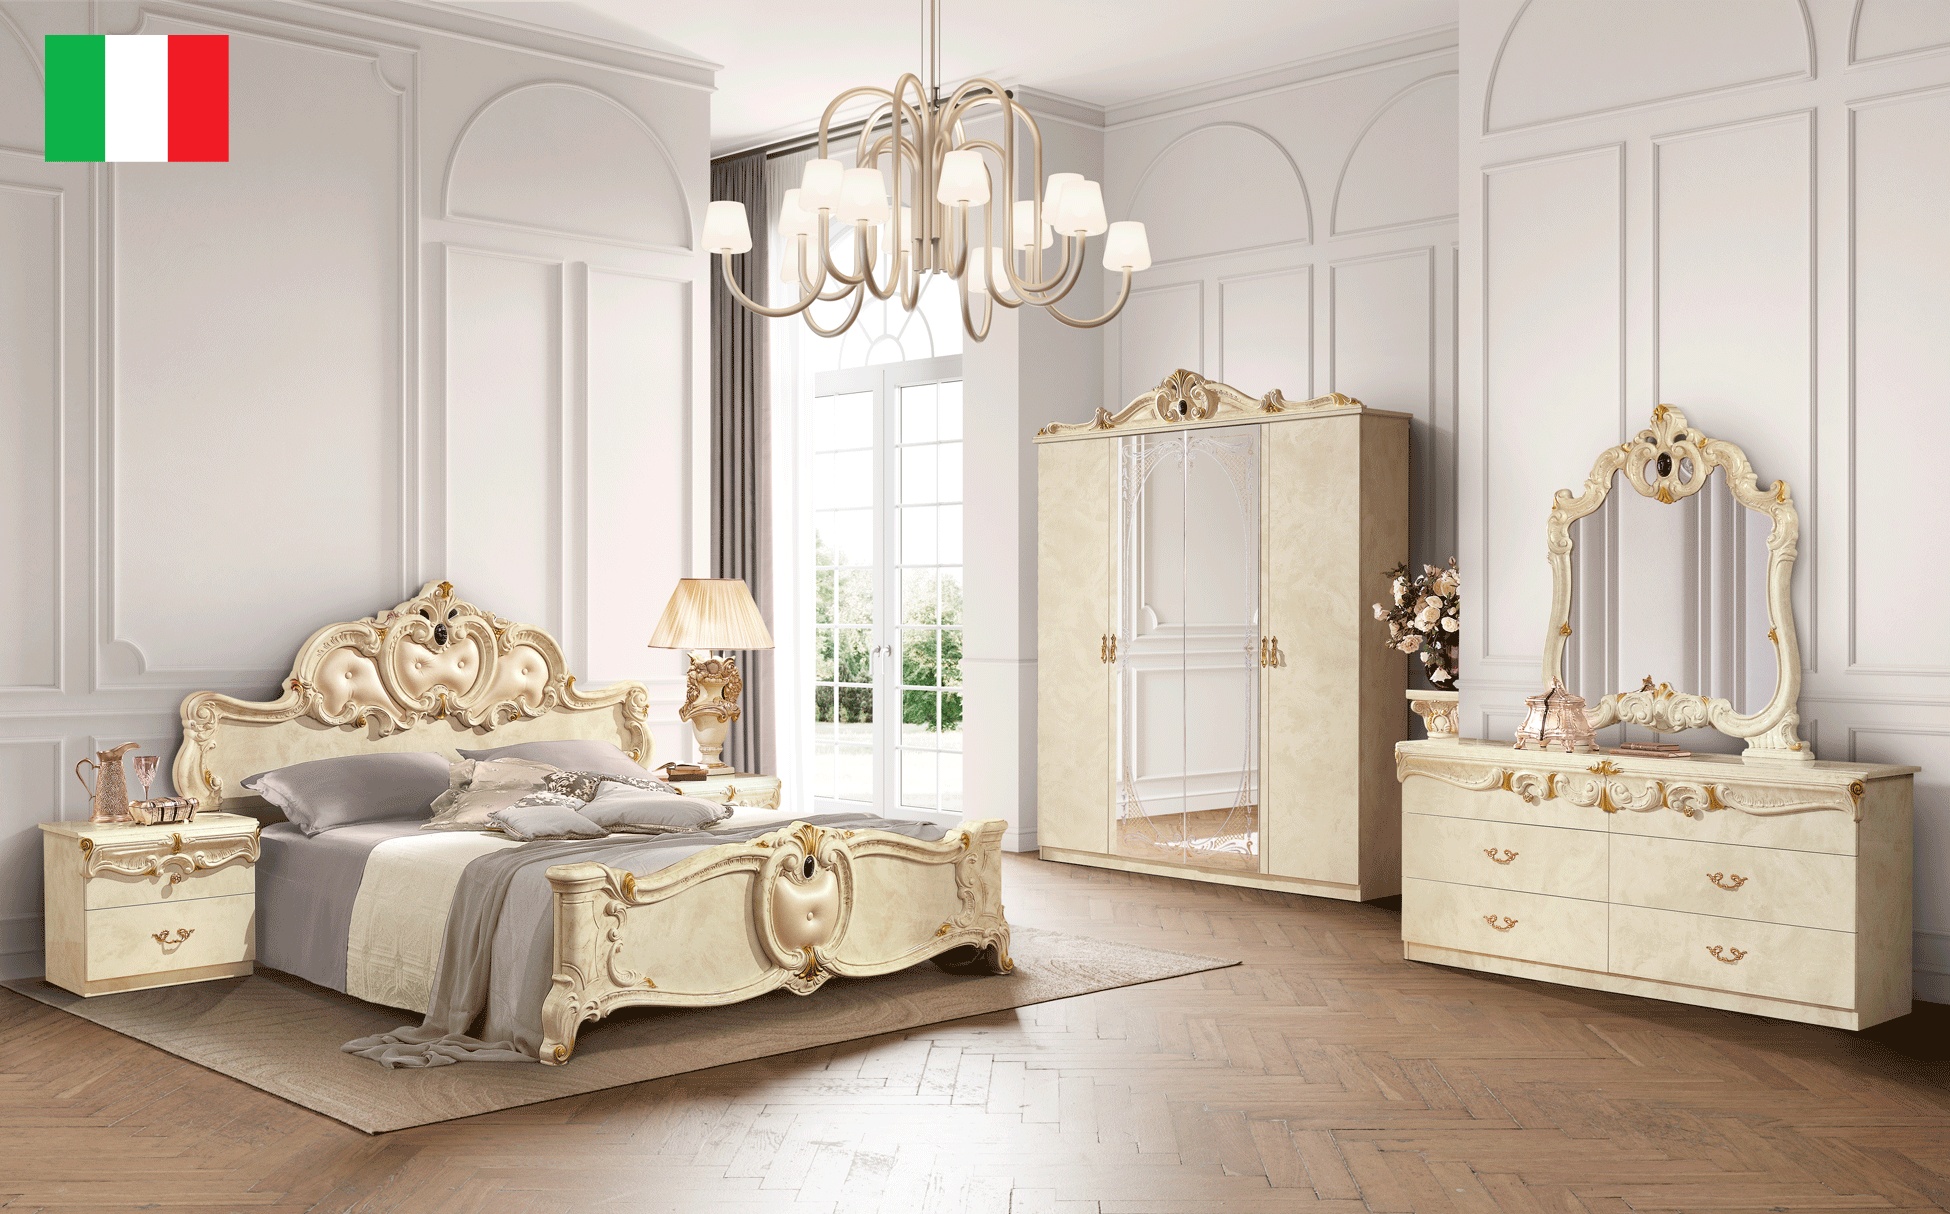 Brands Camel Classic Collection, Italy Barocco Ivory Bedroom